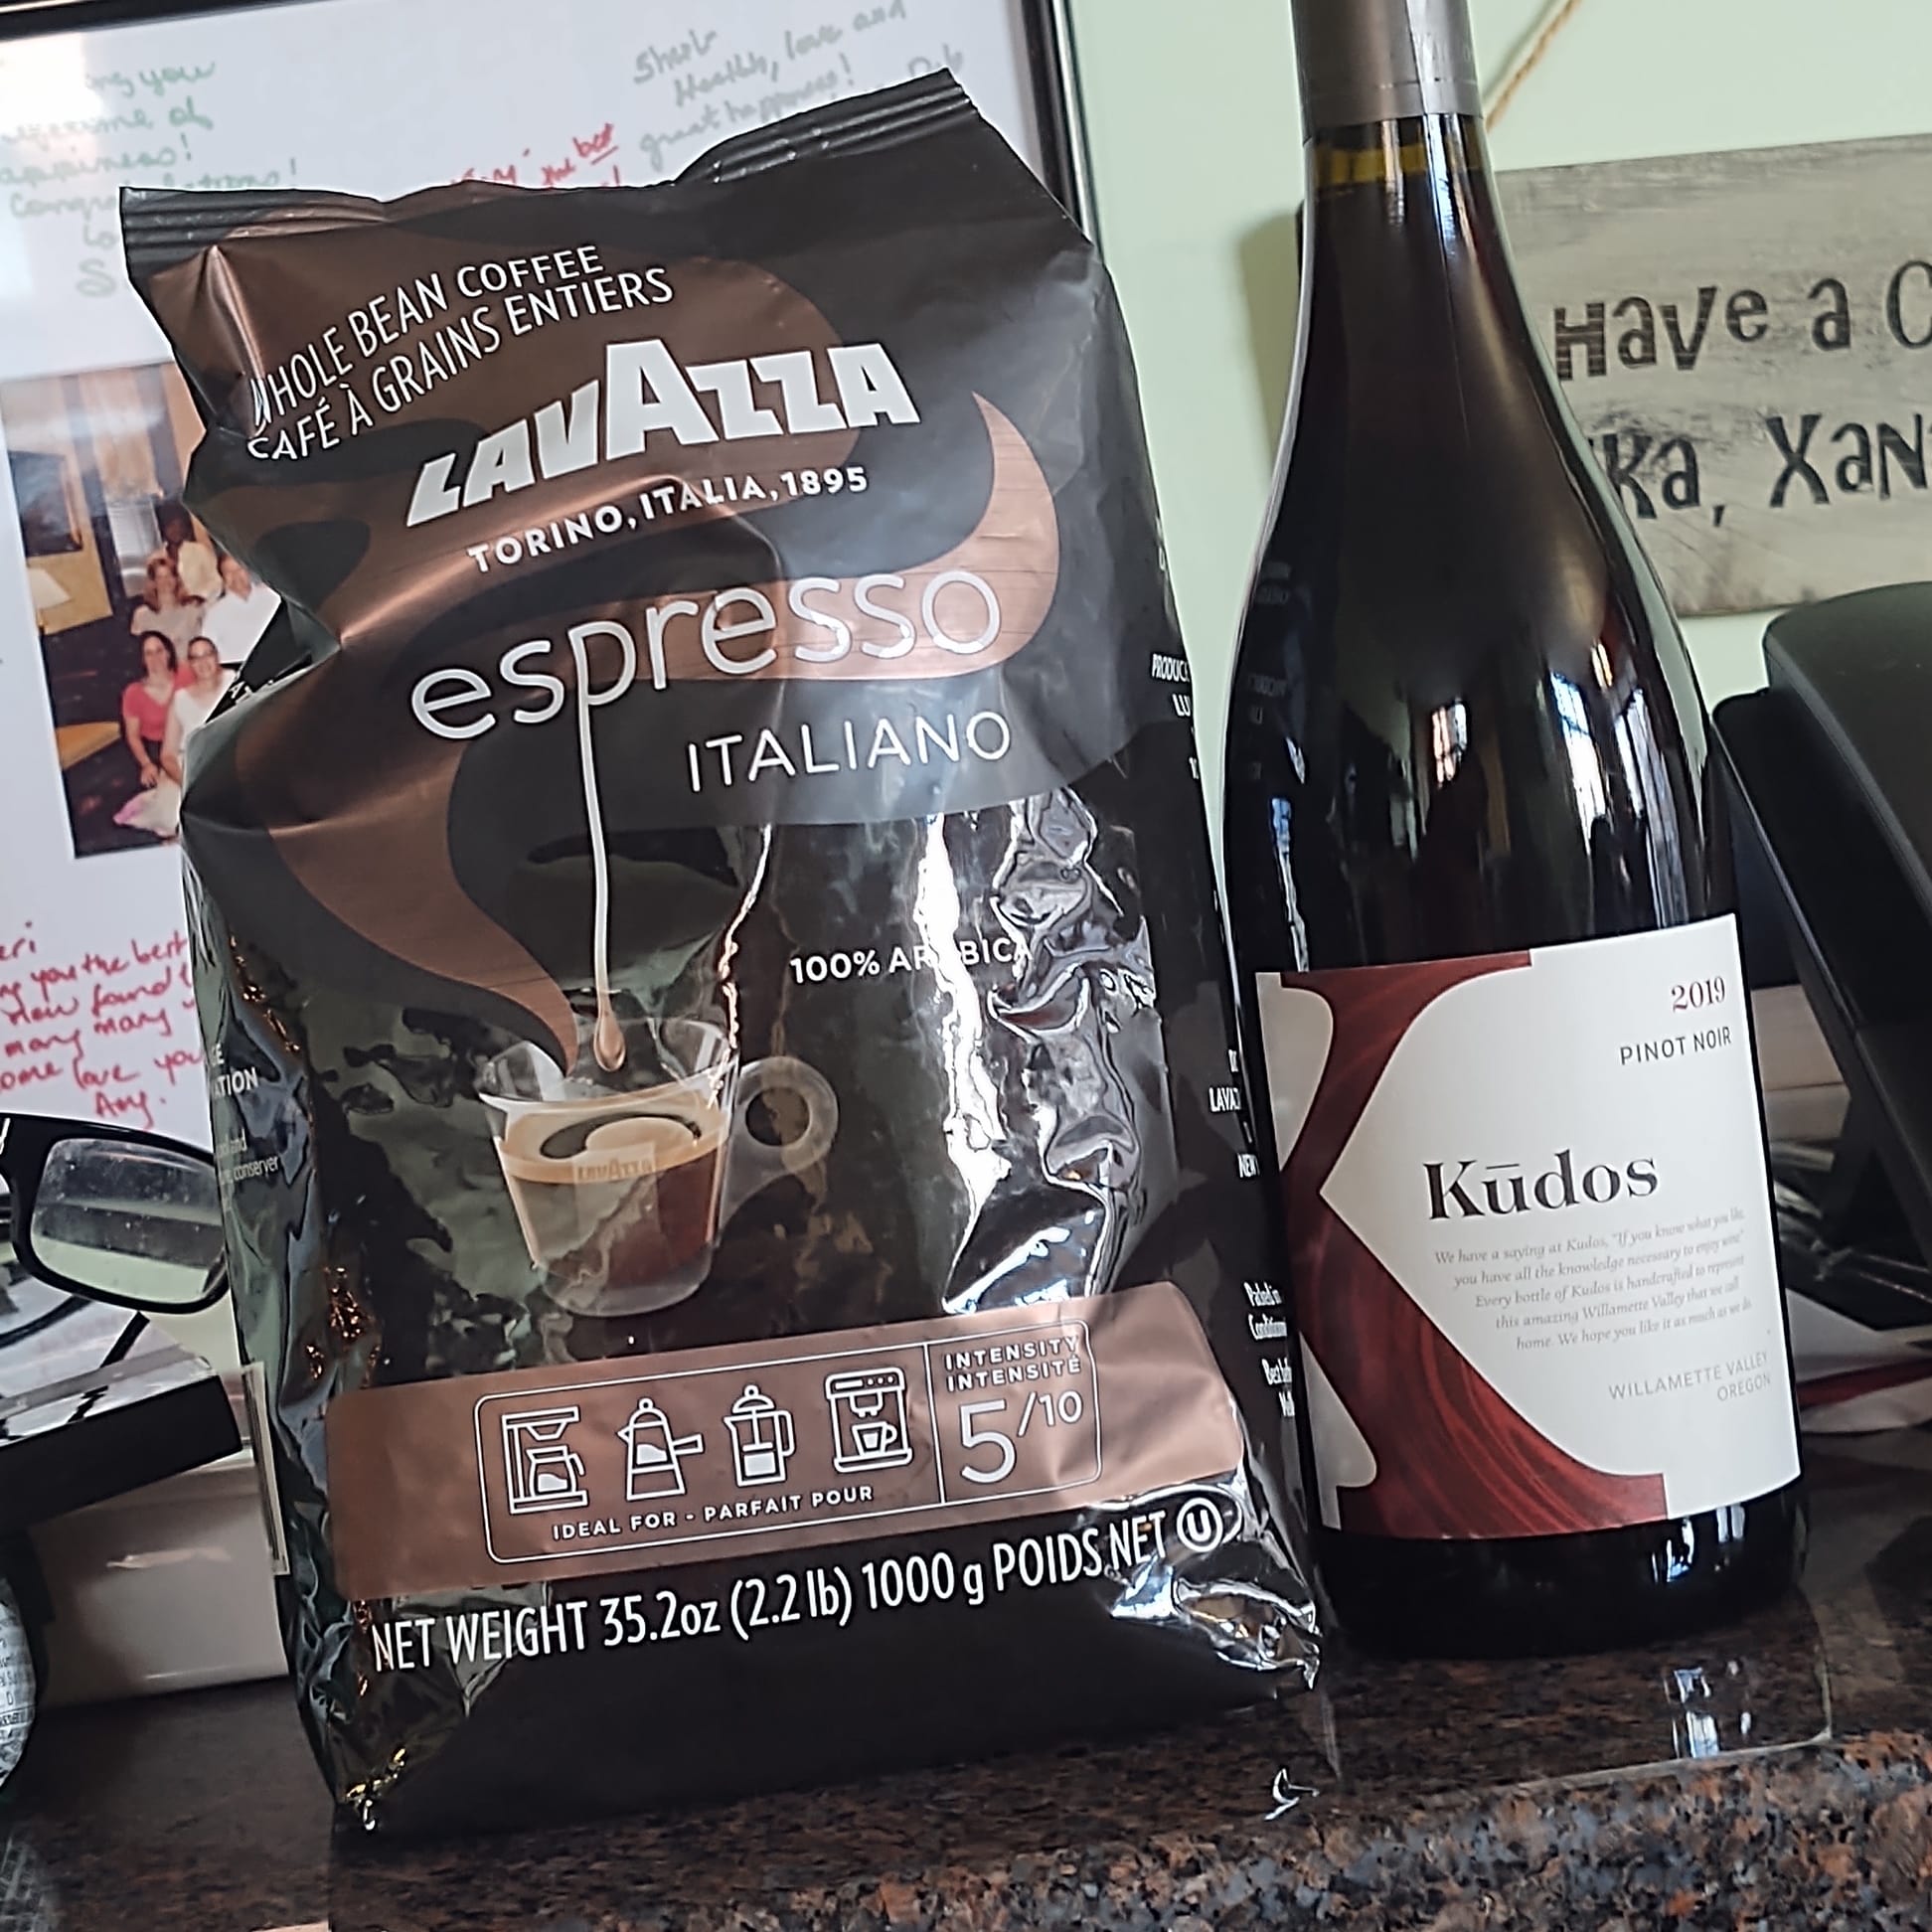 Perfect Christmas gift from friends who know us well: espresso and wine, 12-21.